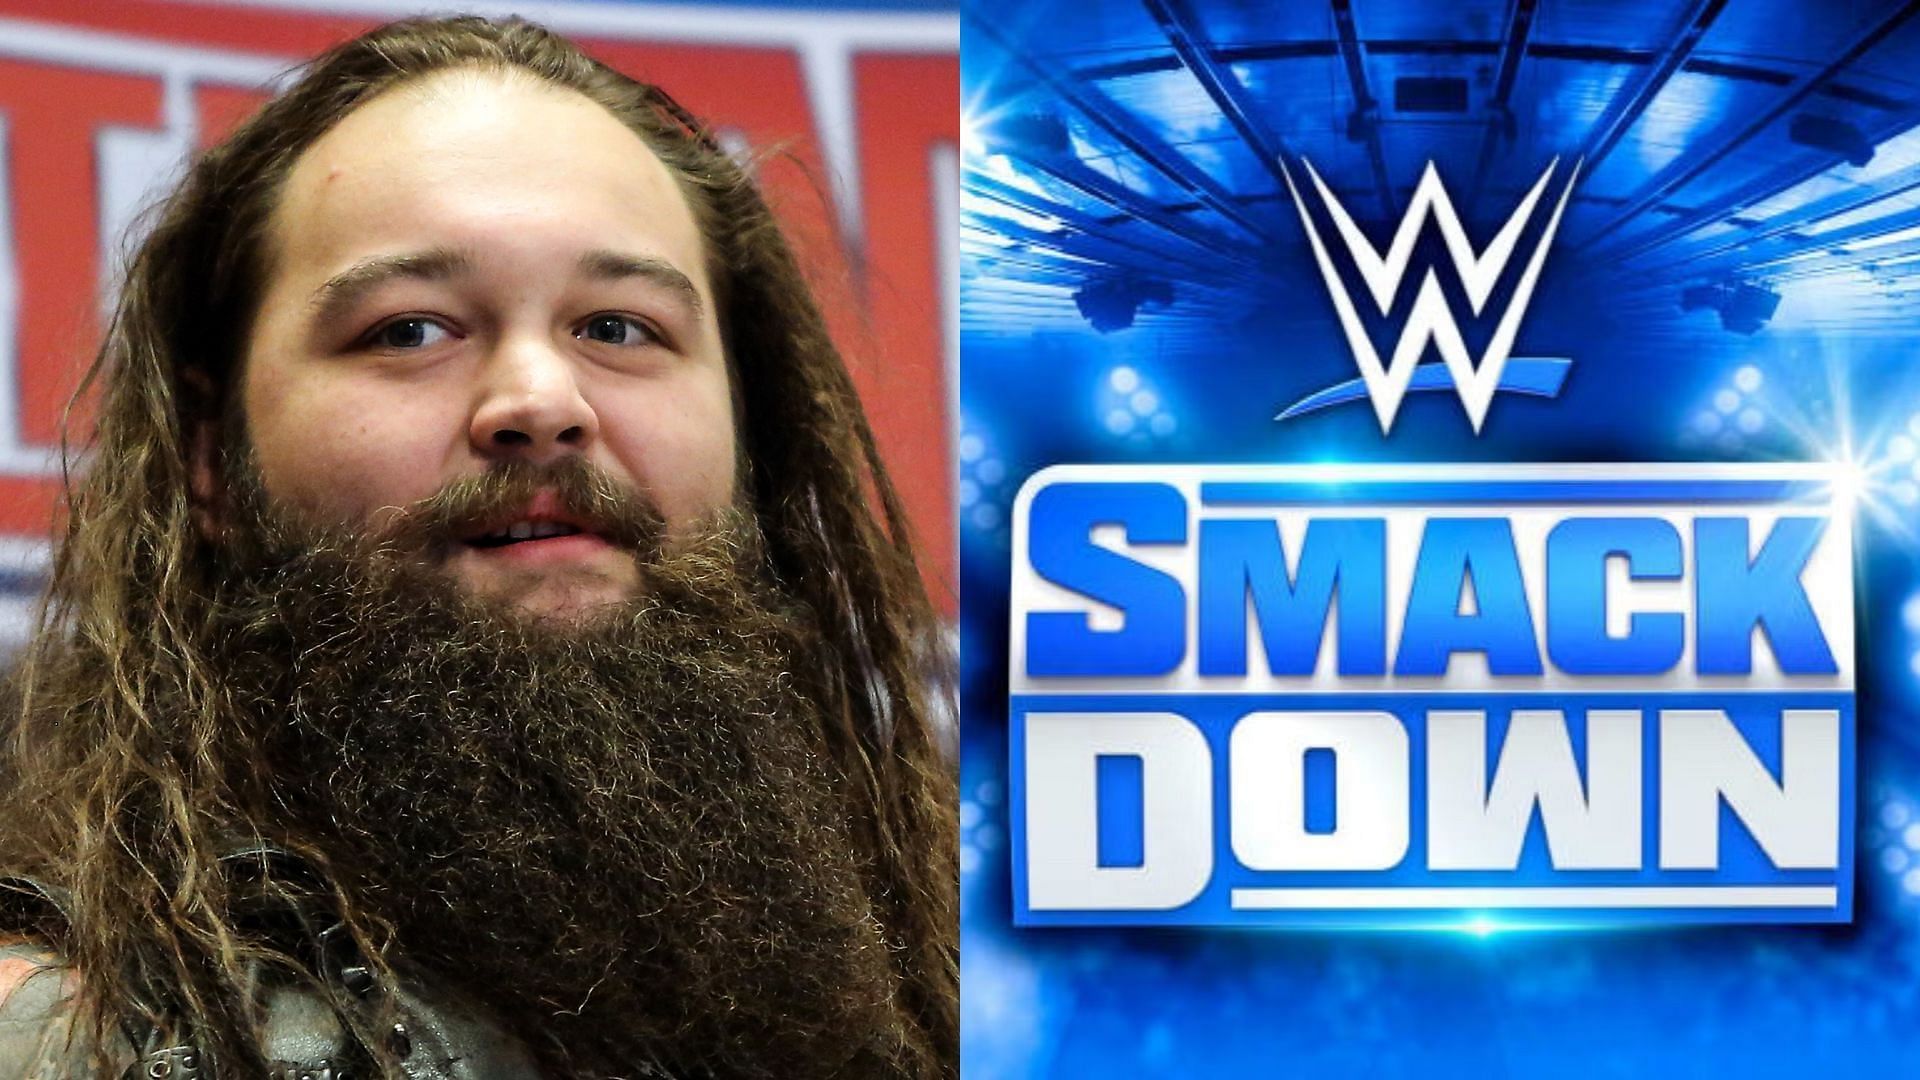 WWE SmackDown tonight is likely to be dedicated to the late Bray Wyatt